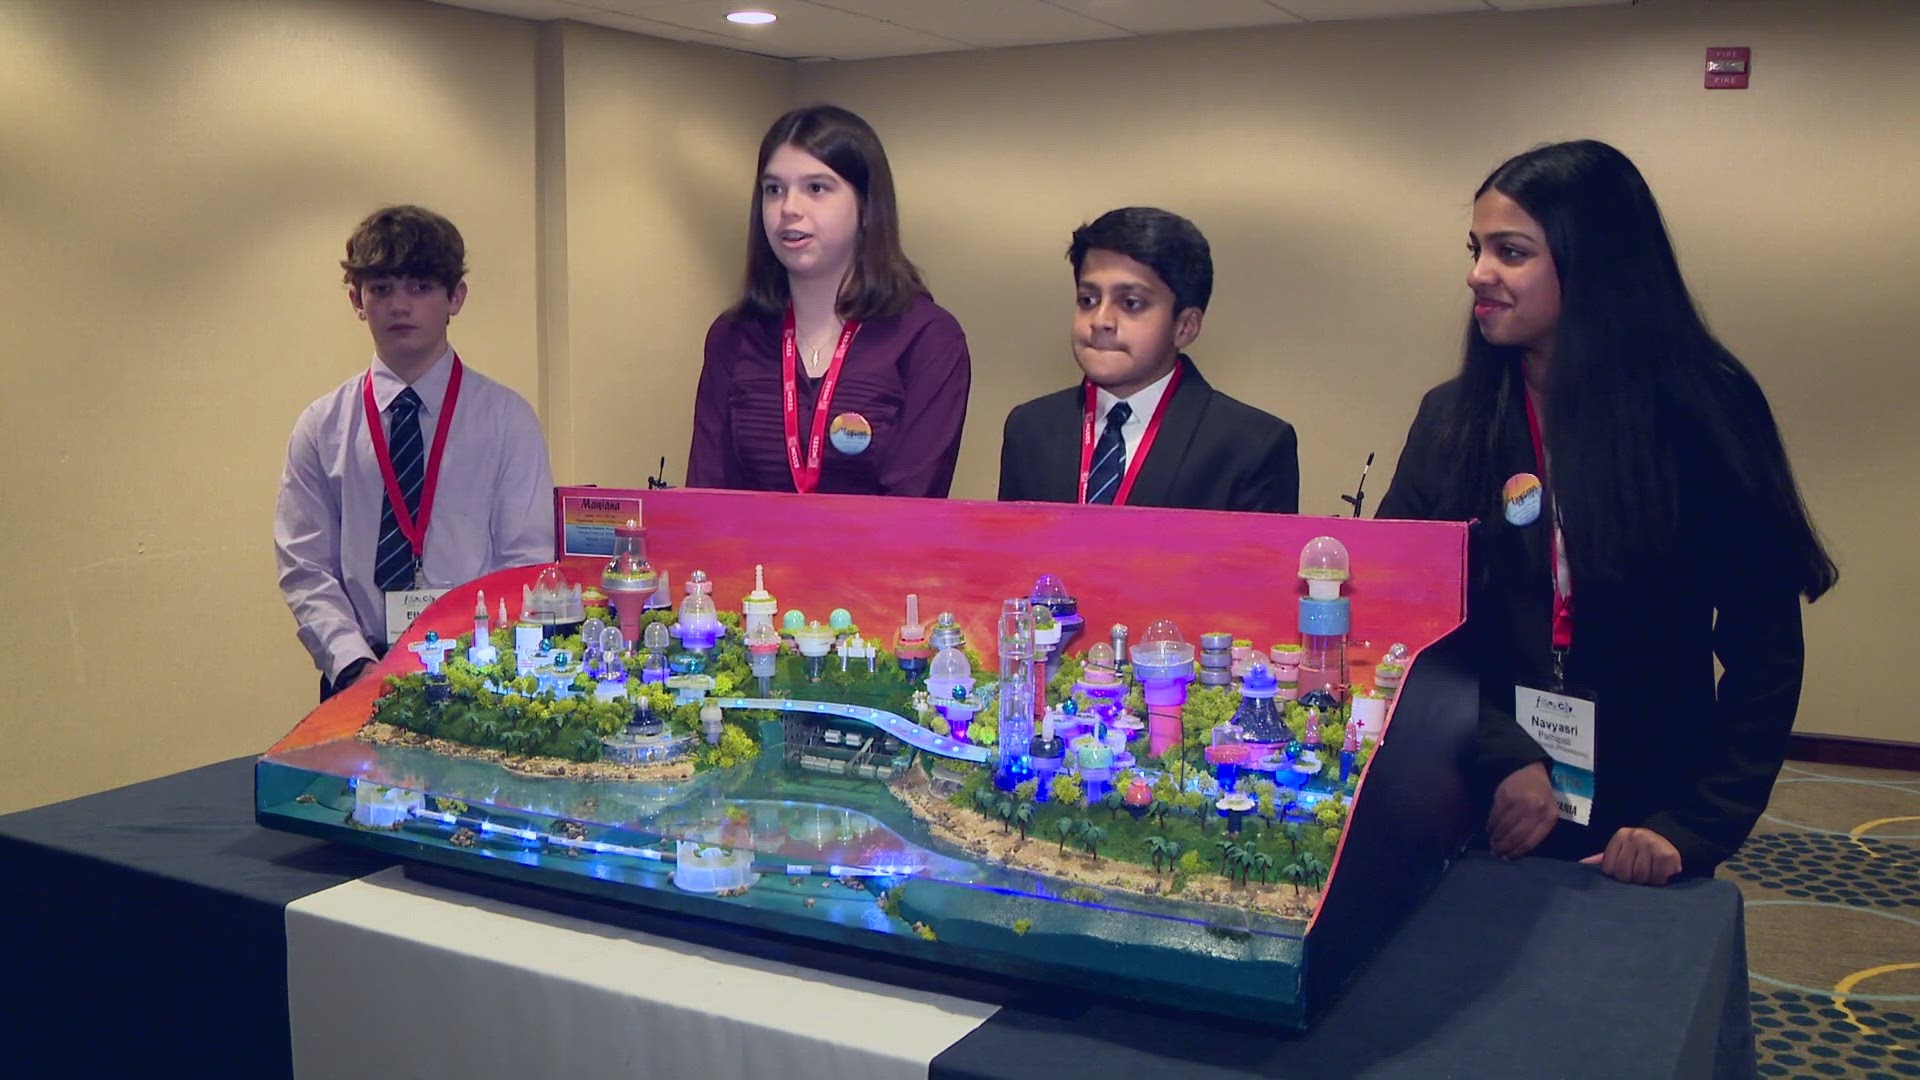 Students competed in the Future City Competition and we sent our Meteorologist Makayla Lucero to see what kinds of cities the kids created.